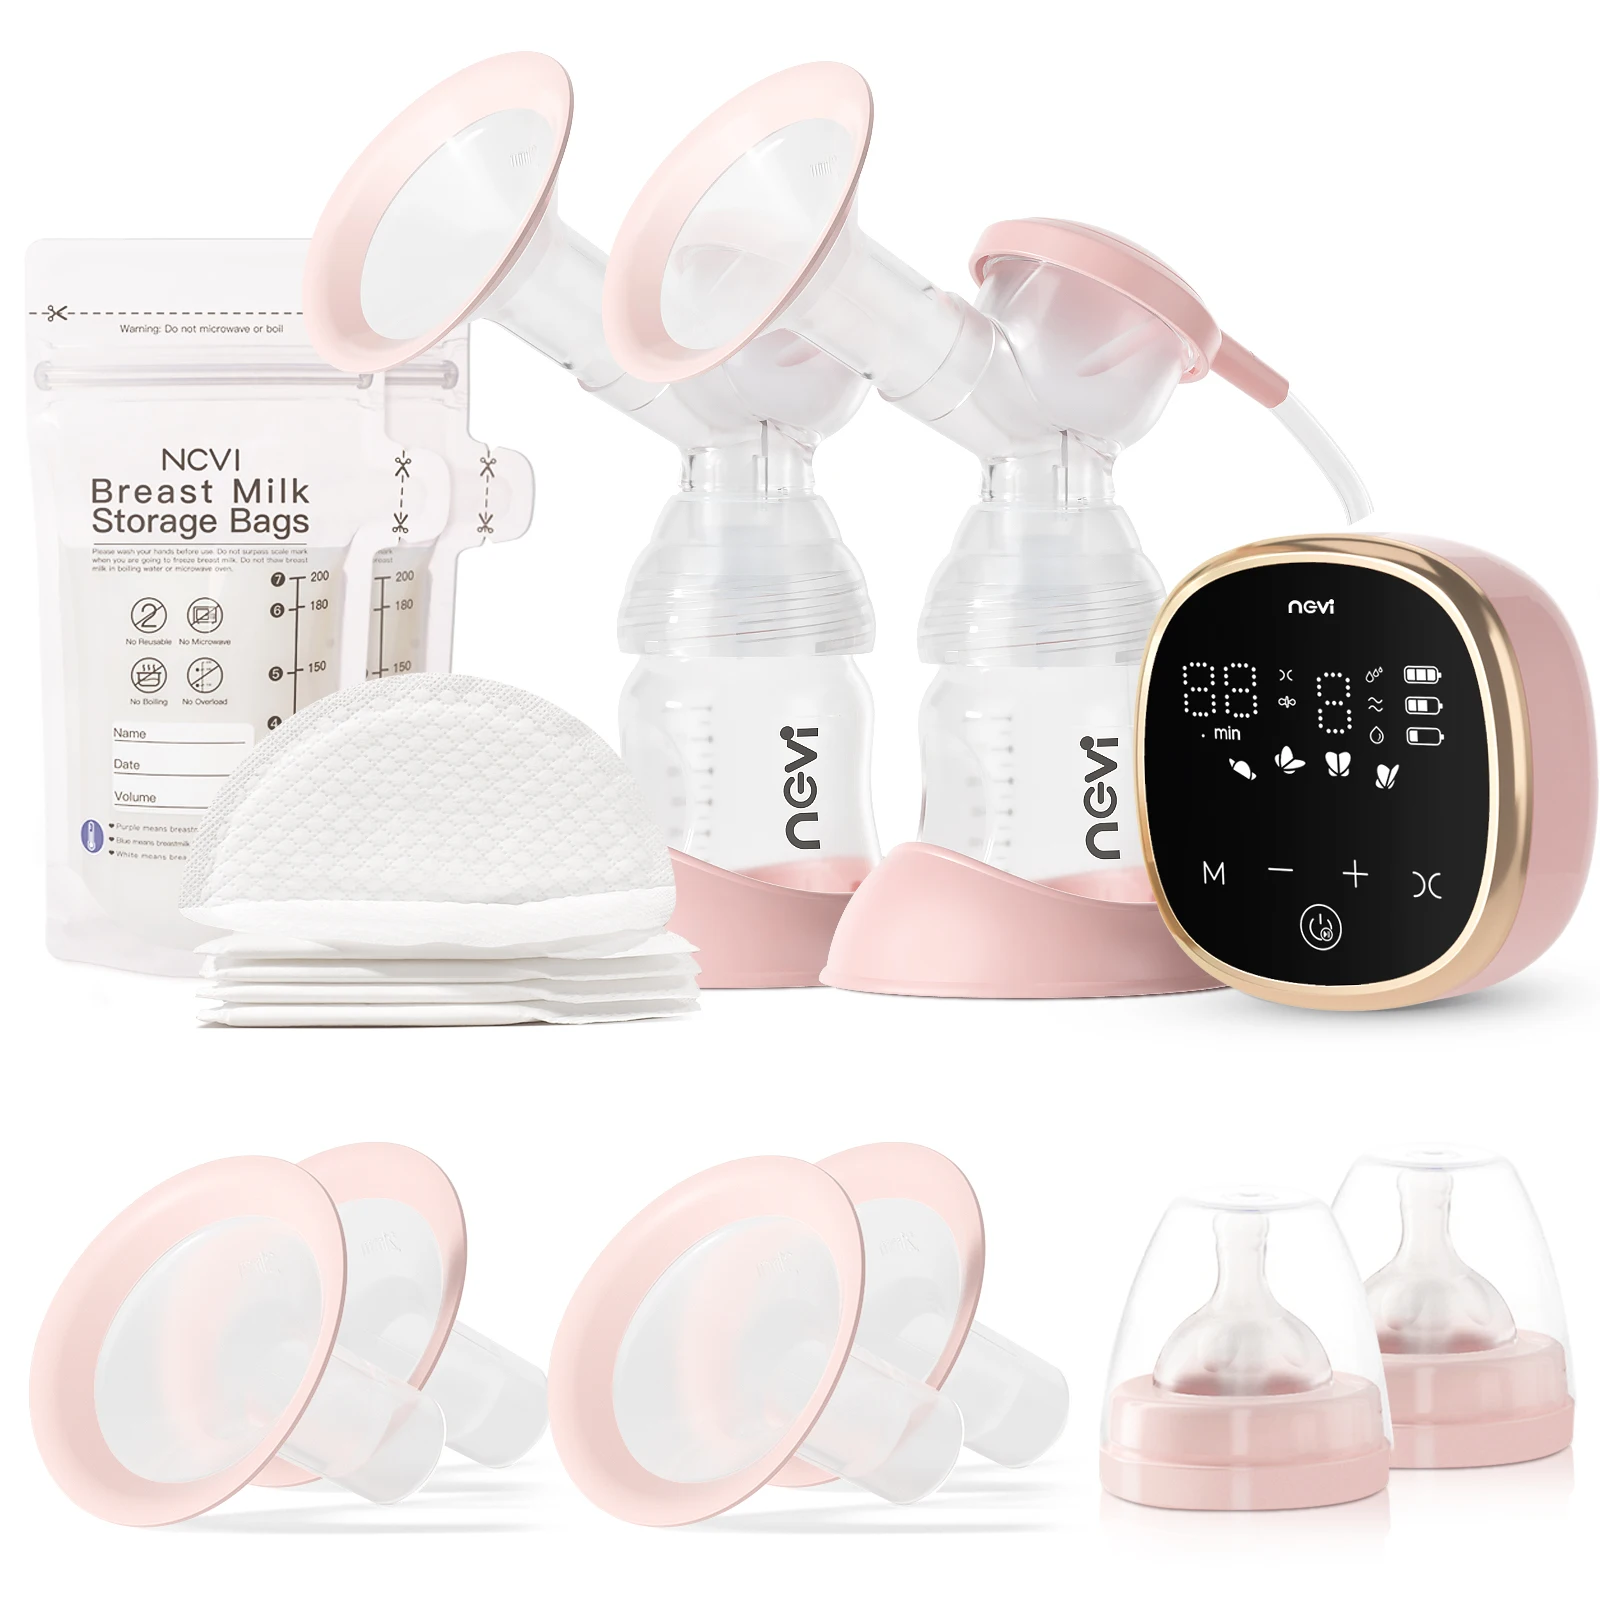 Wearable Breast Pump Hands Free: Portable Electric Breast Pumps with 24mm  Flange 3 Modes 9 Levels Leak-Proof Massage Function Single Rechargeable